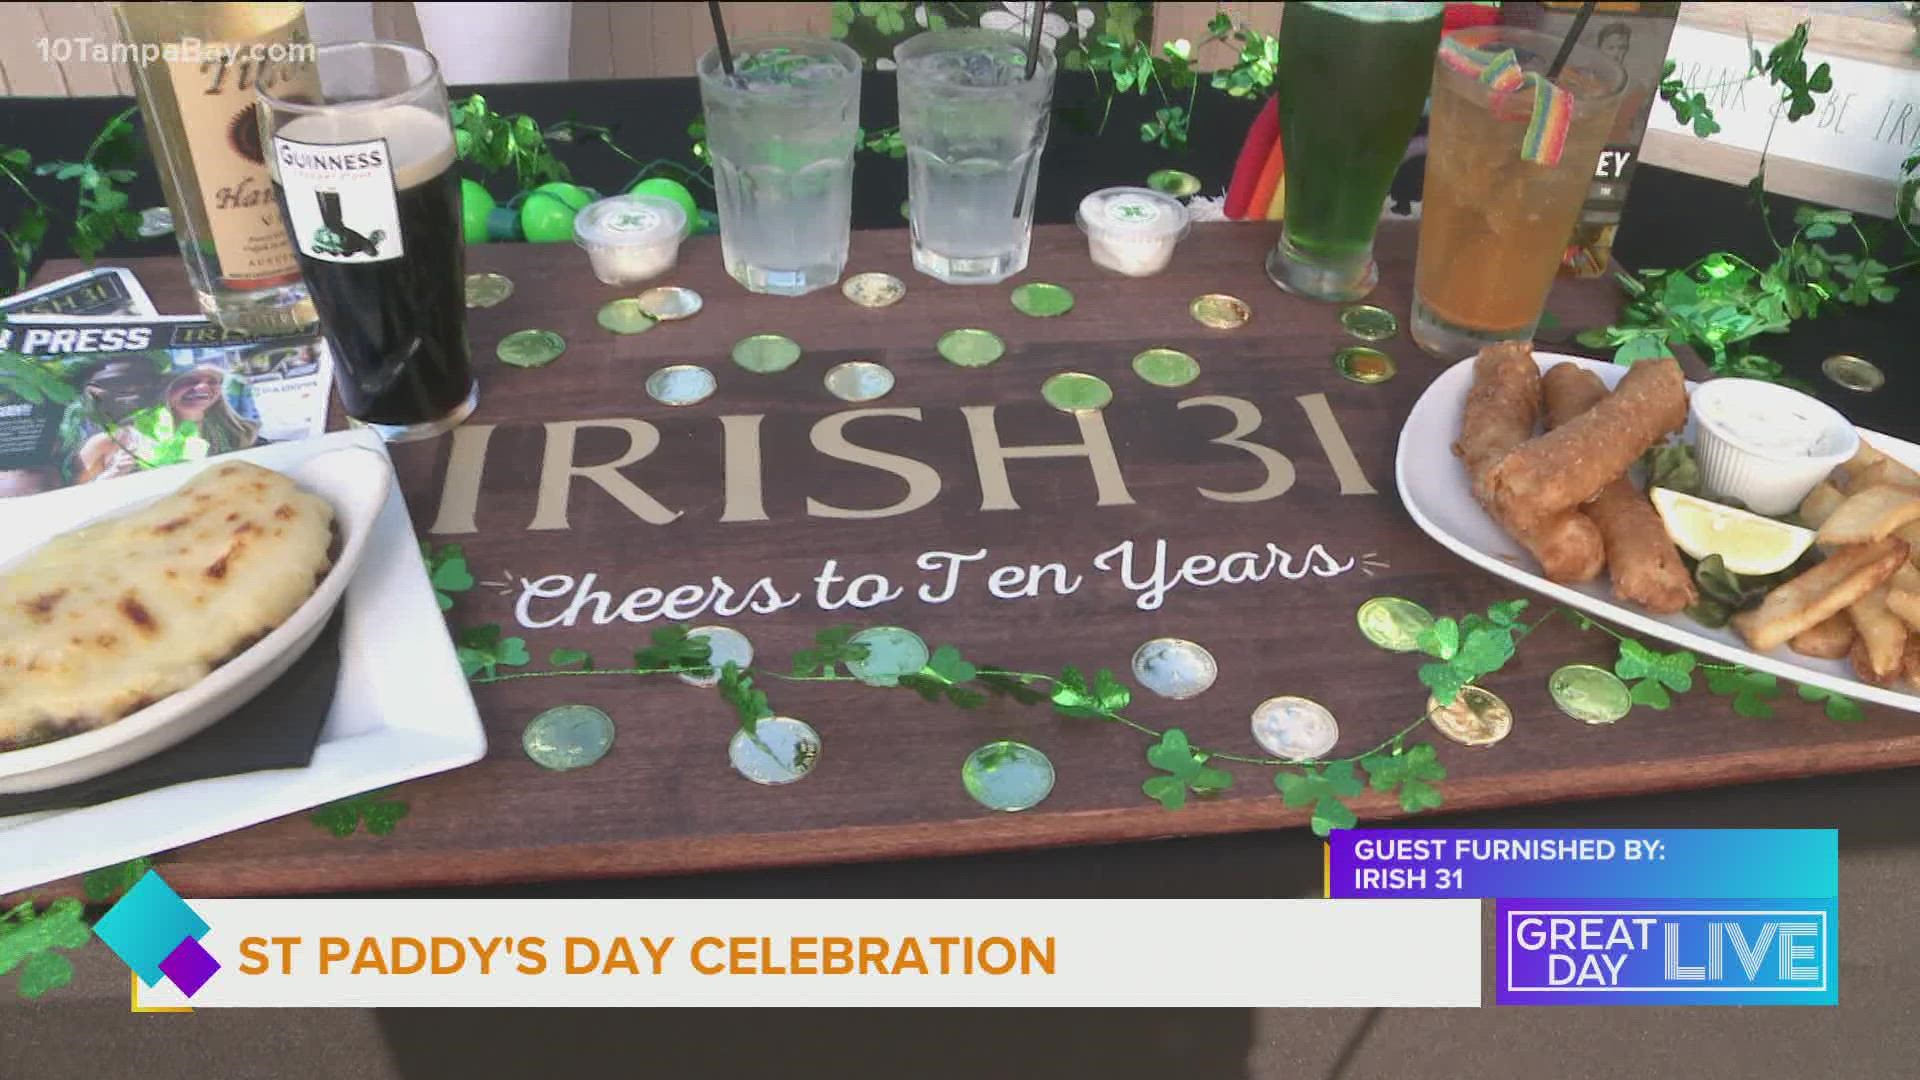 Irish 31 is hosting Paddyfest tonight with live music, green beer and much more at each of its locations.